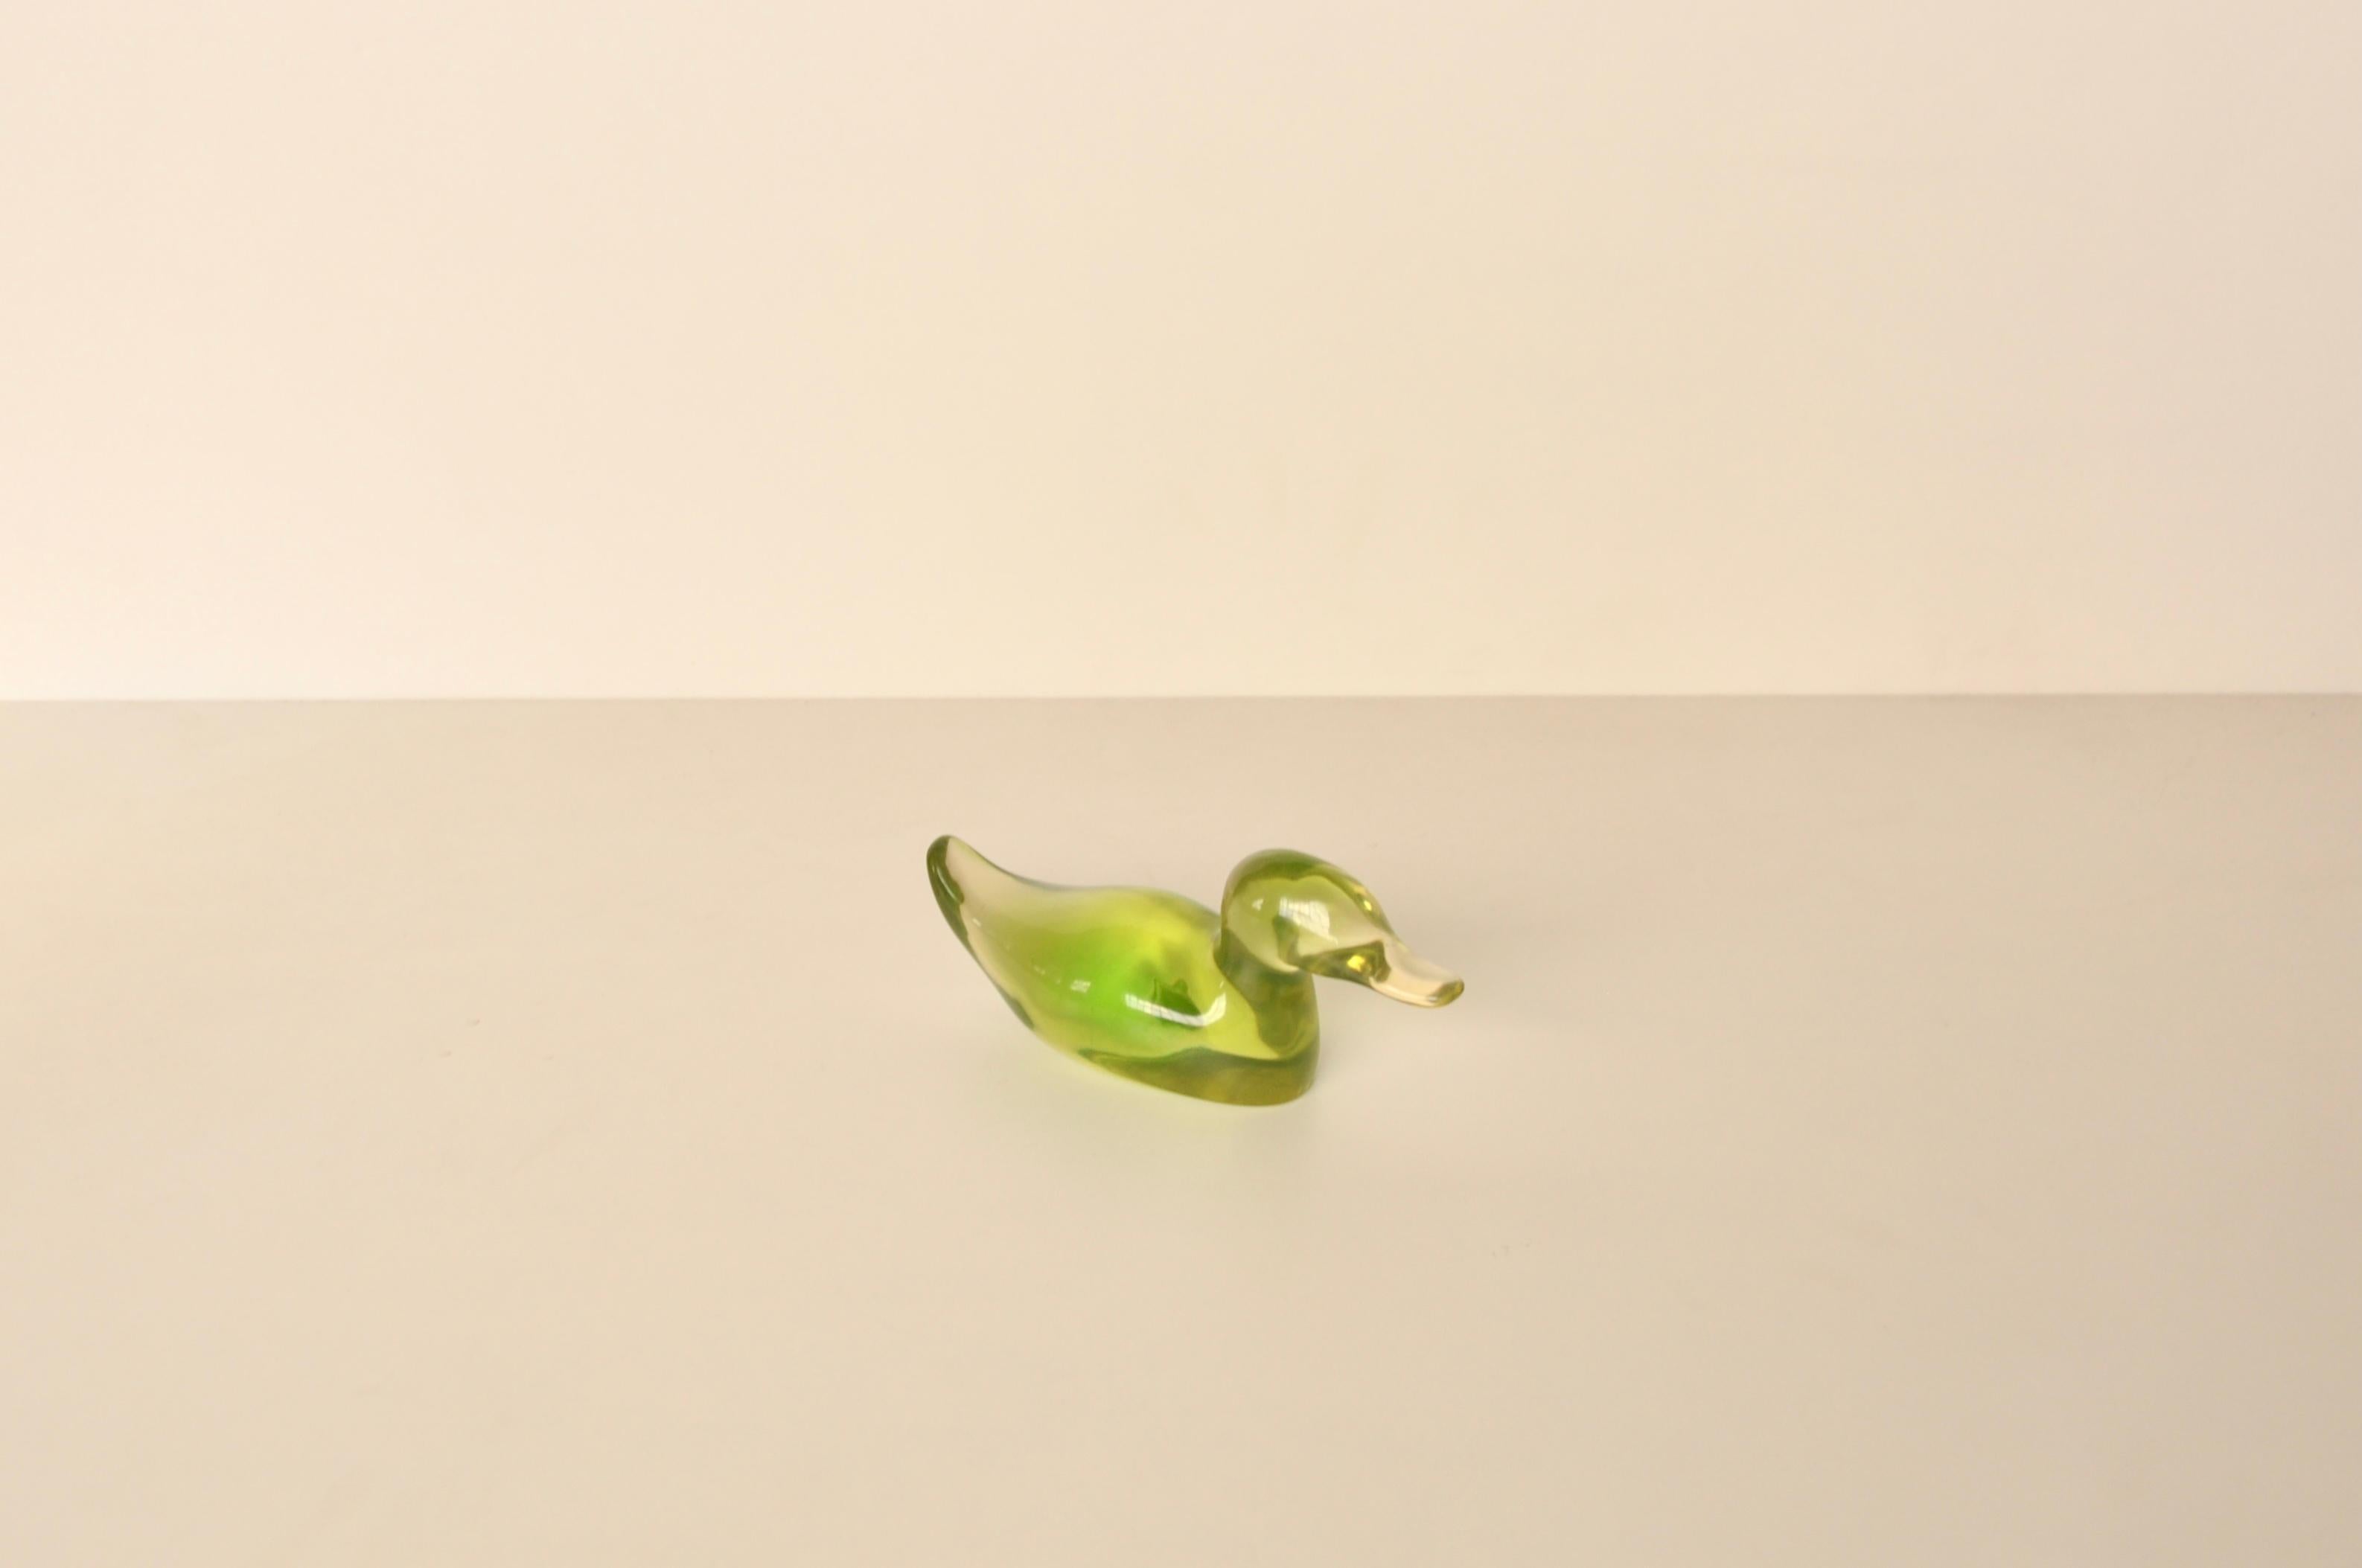 Brazilian mid-century green lucite sculpture in the shape of a duck designed by Abraham Palatnik and manufactured by Silon in Rio de Janeiro, that produced large-scale design objects from the 1970s to the 2000s. This piece still keeps the original